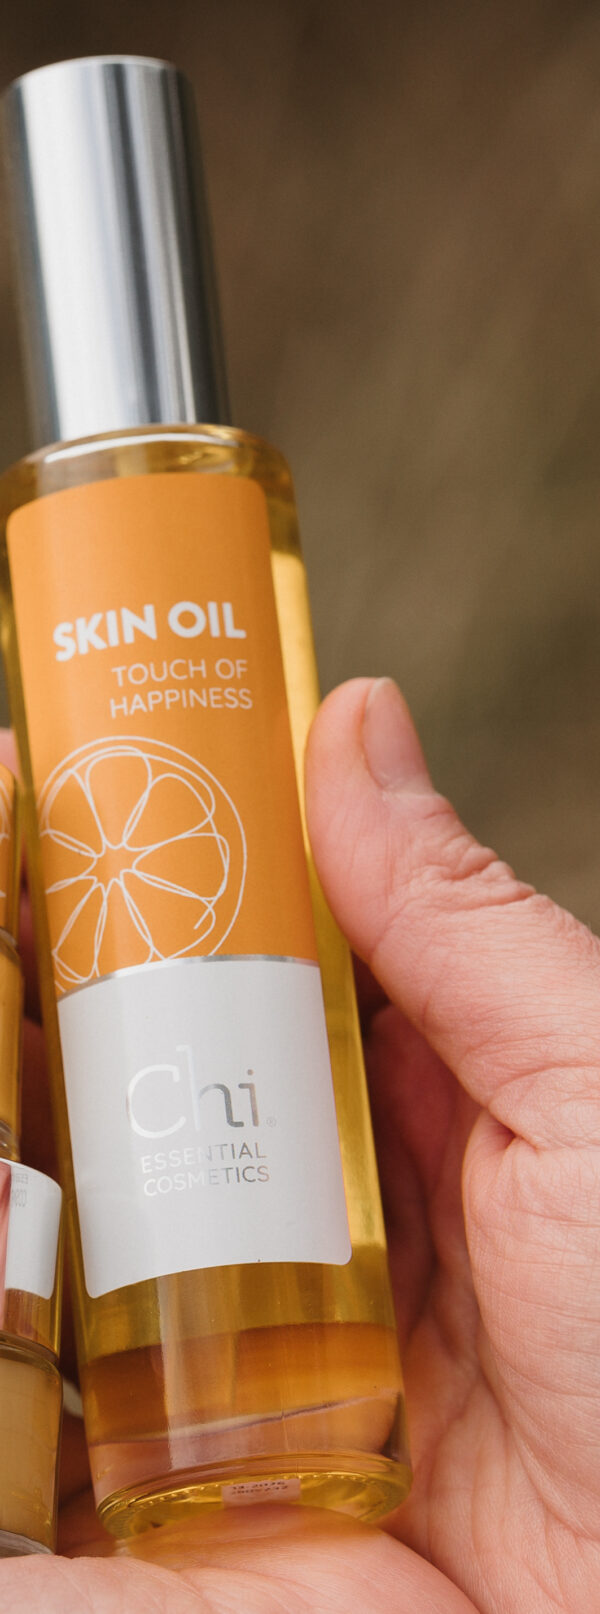 Skin Oil A Touch of Happiness Hand